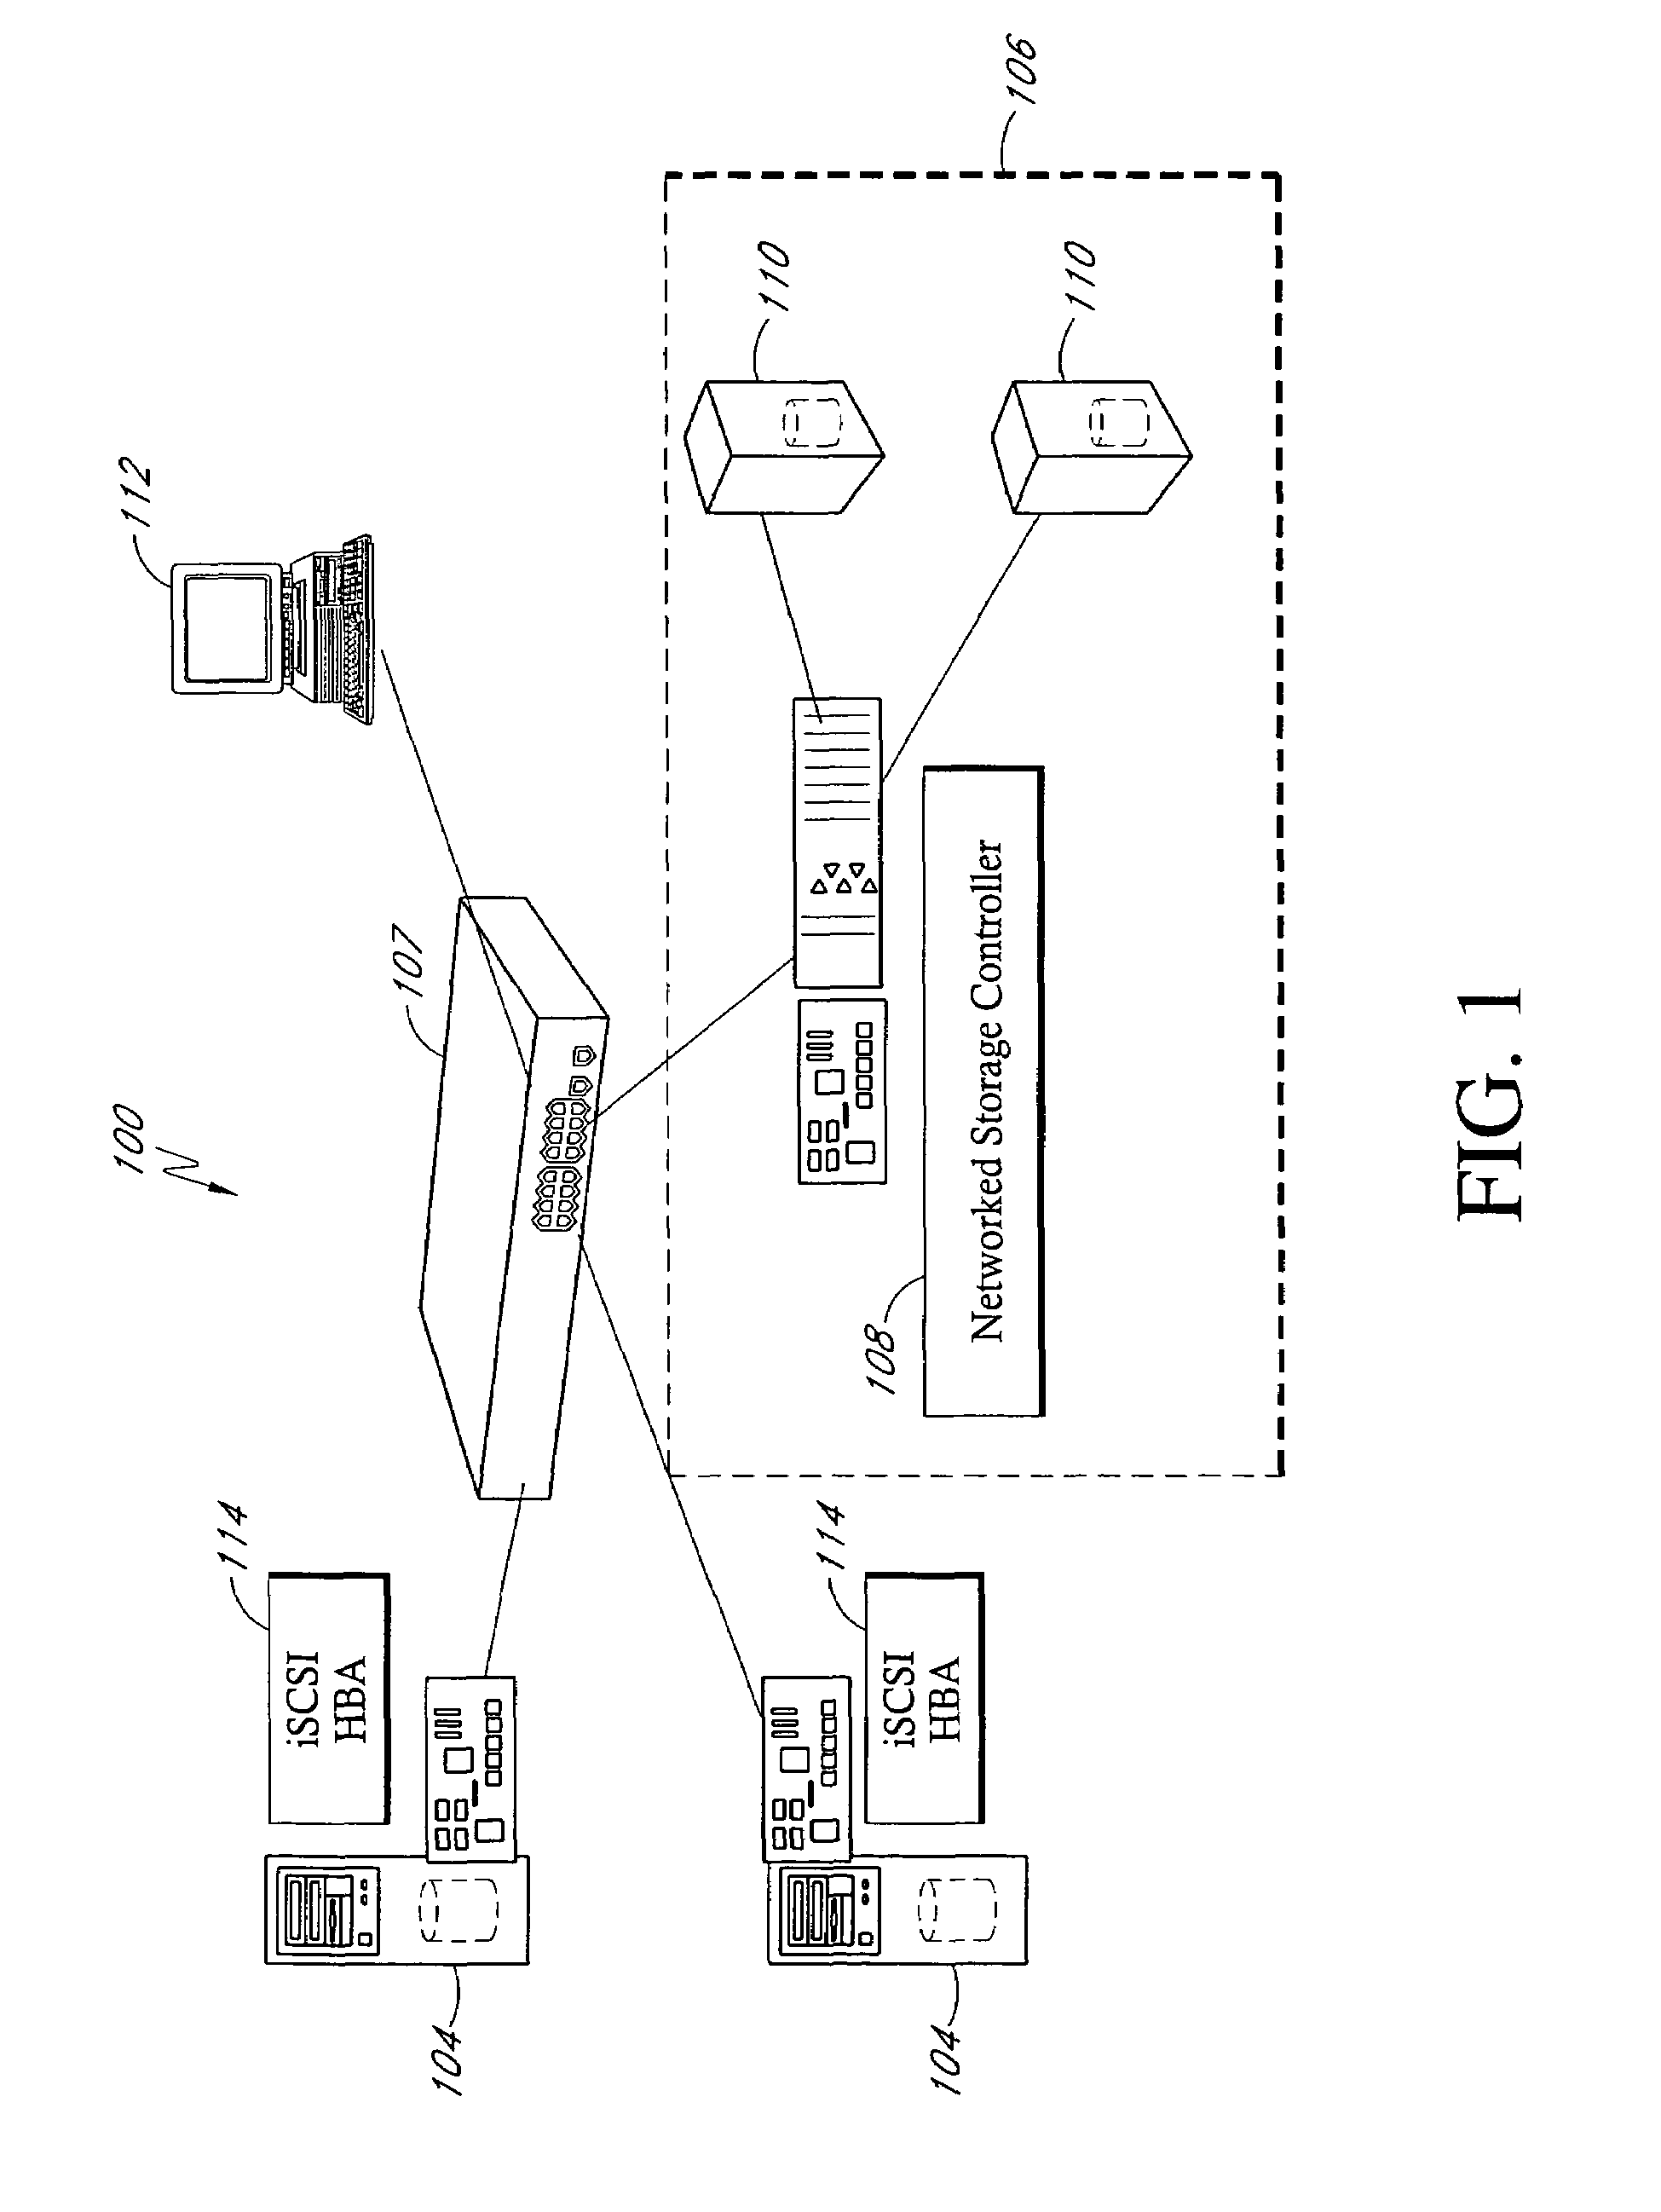 System and methods for high rate hardware-accelerated network protocol processing